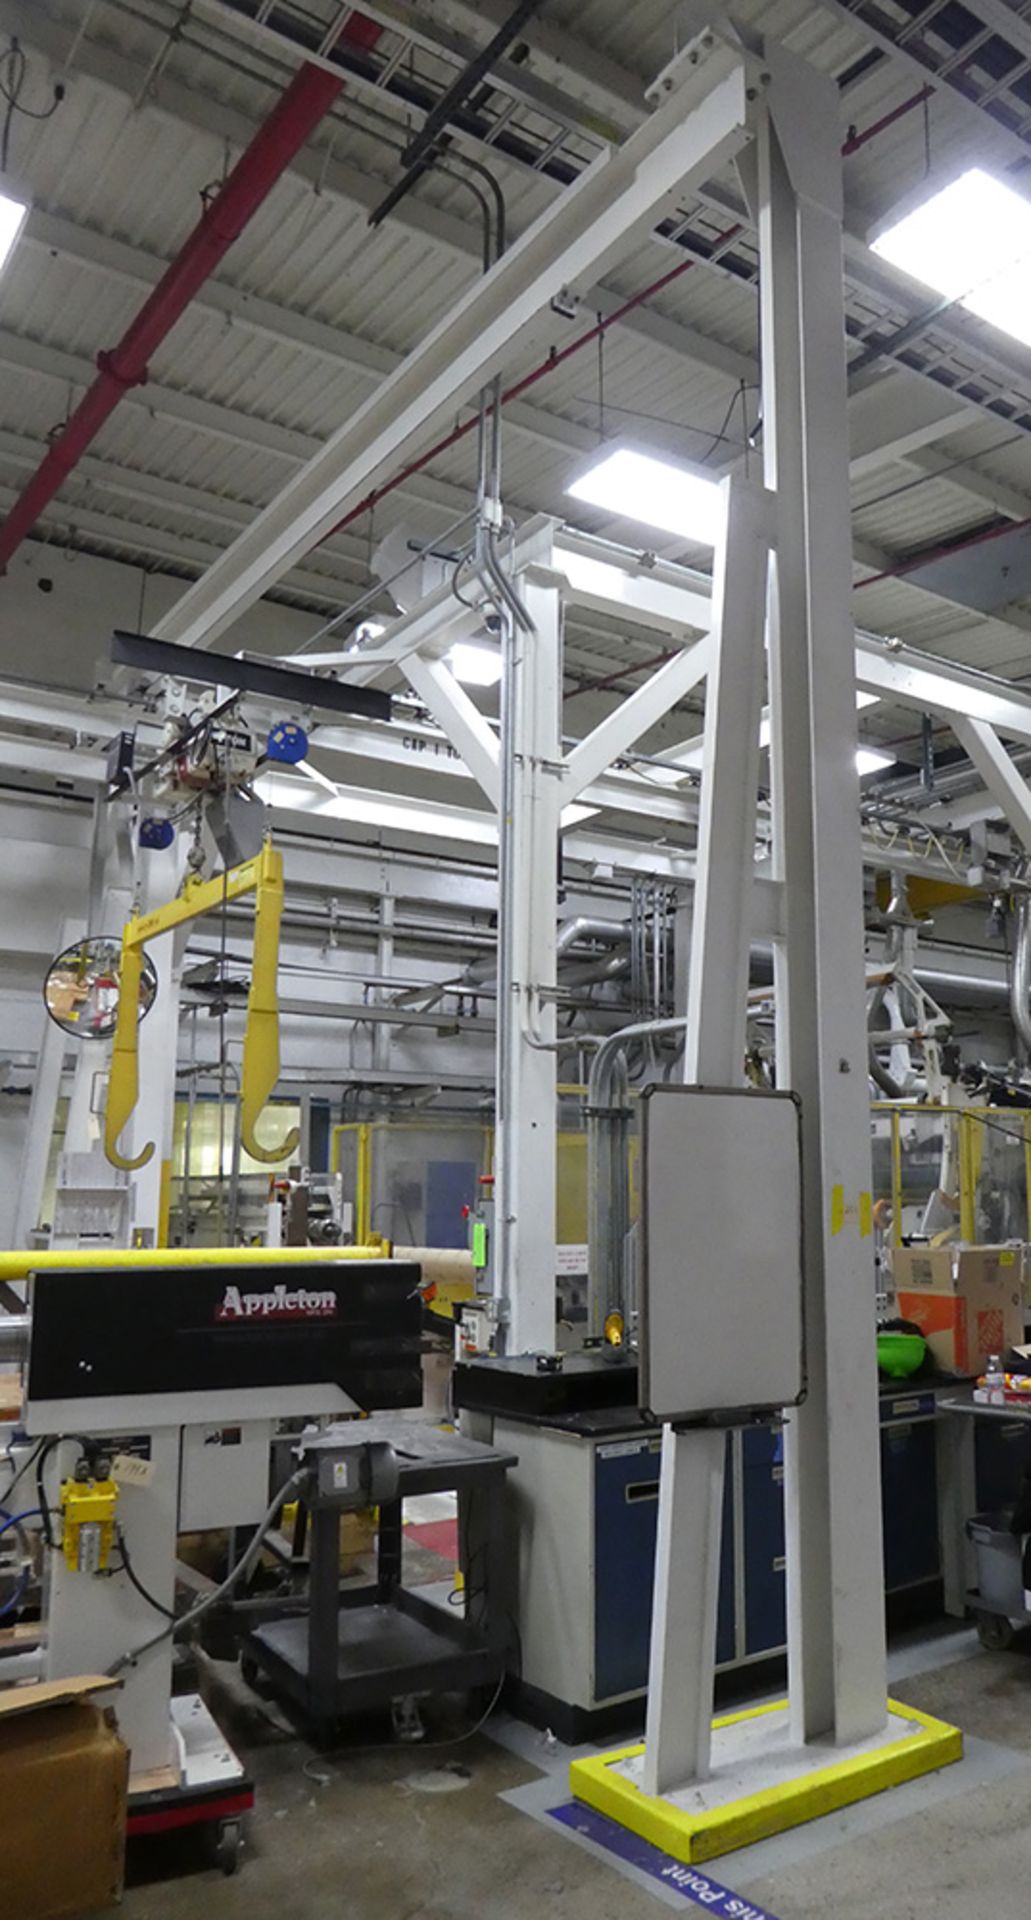 Automatic Handling X-Y-Z C-Hook Roll Handling System - Image 5 of 6